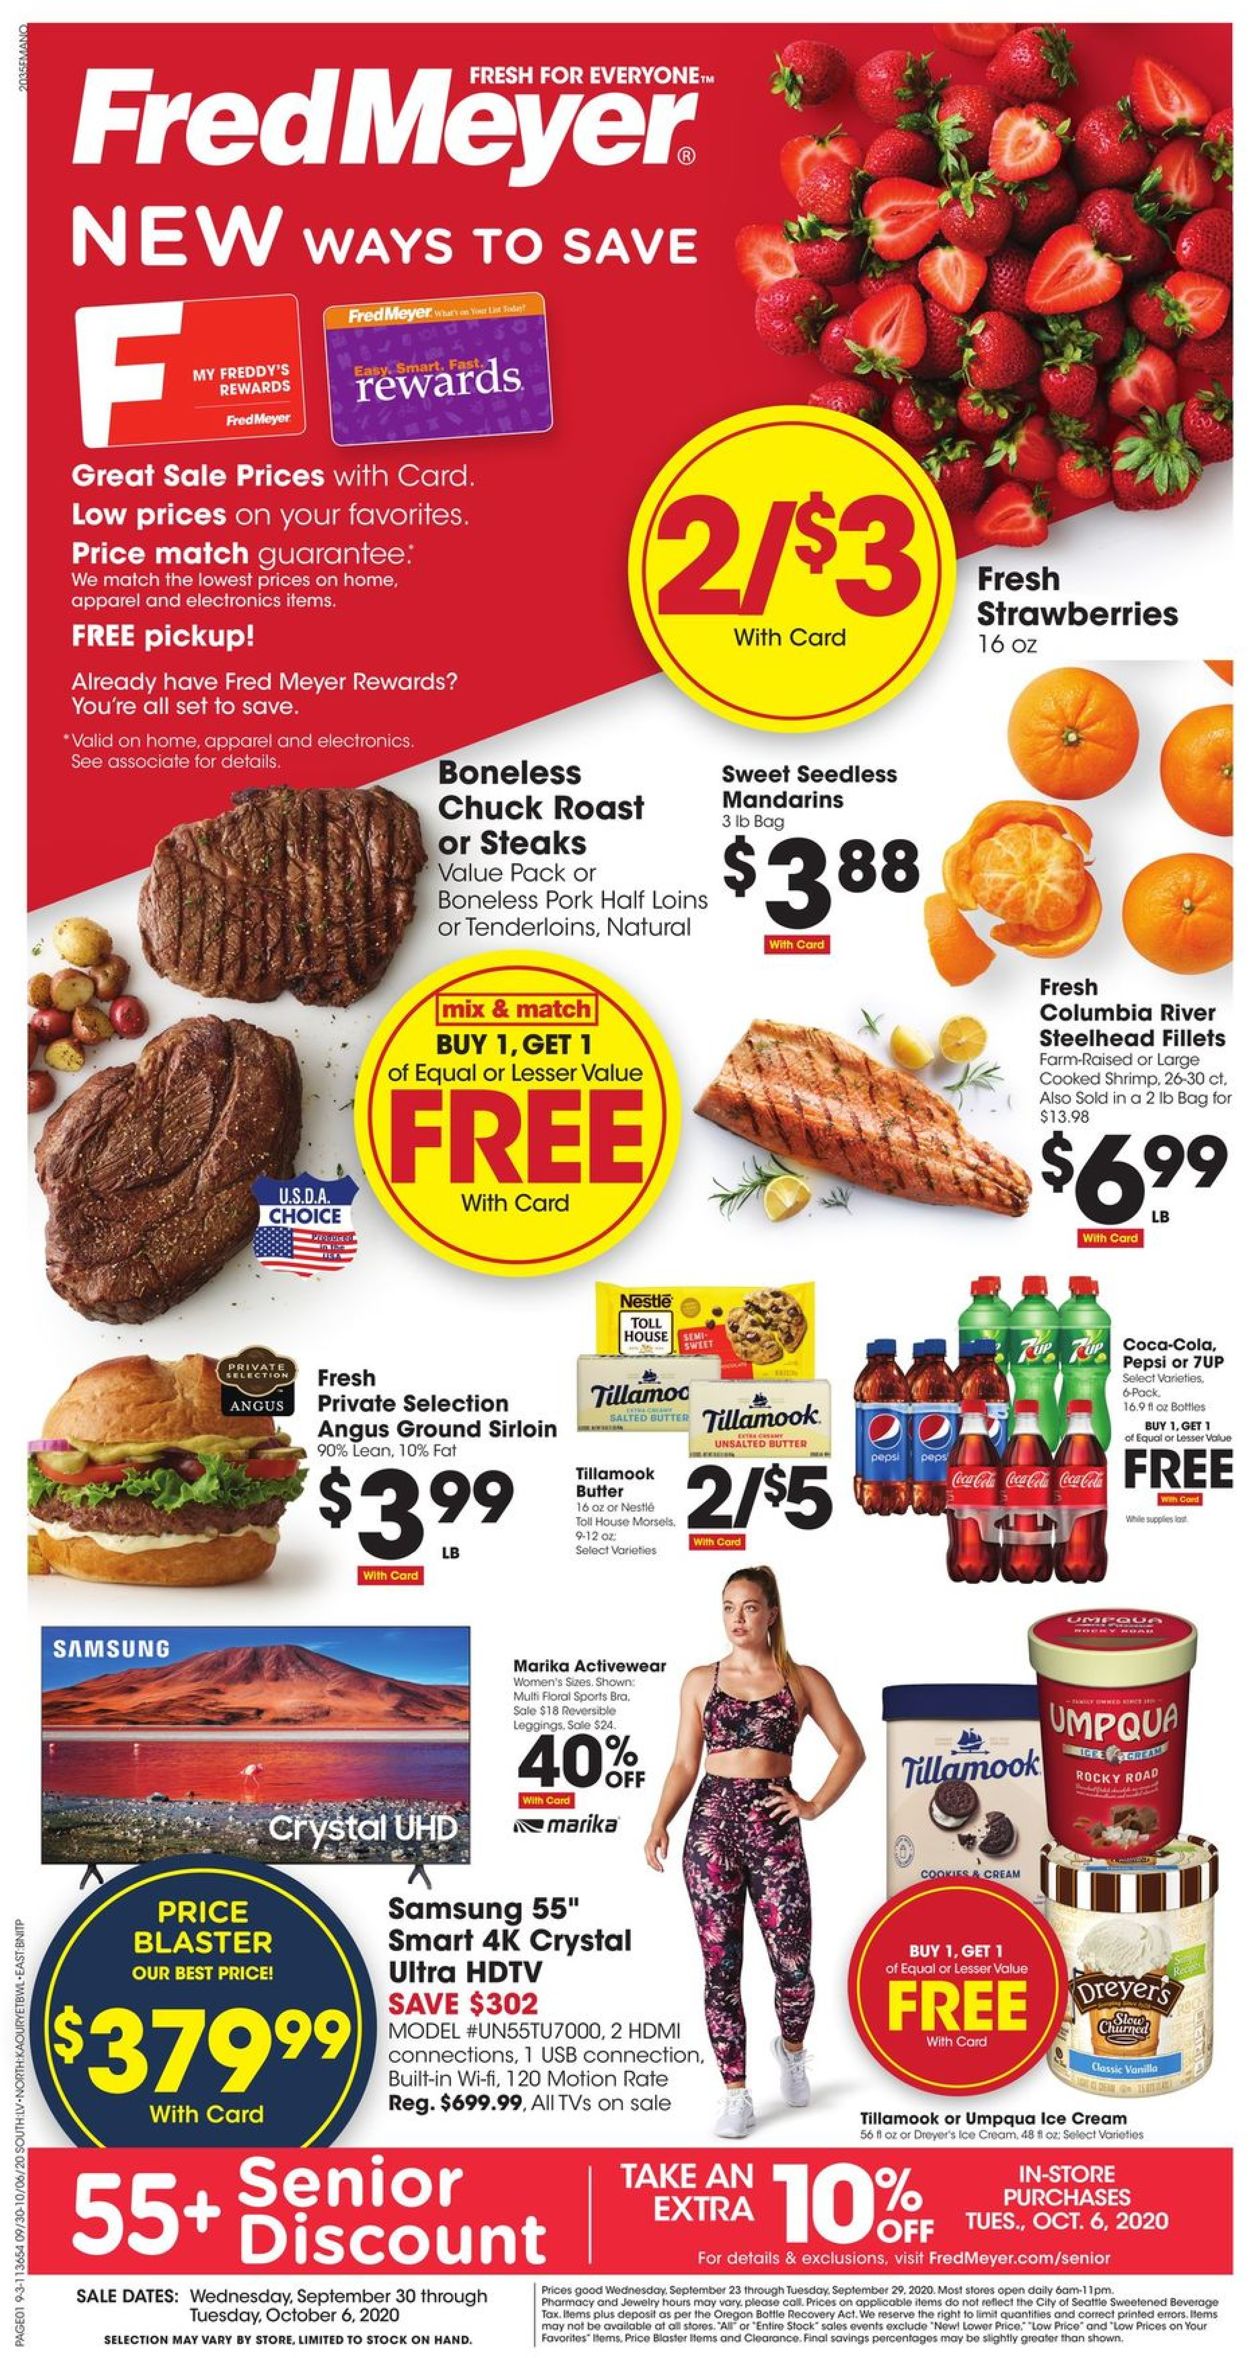 Fred Meyer Current weekly ad 09/30 10/06/2020